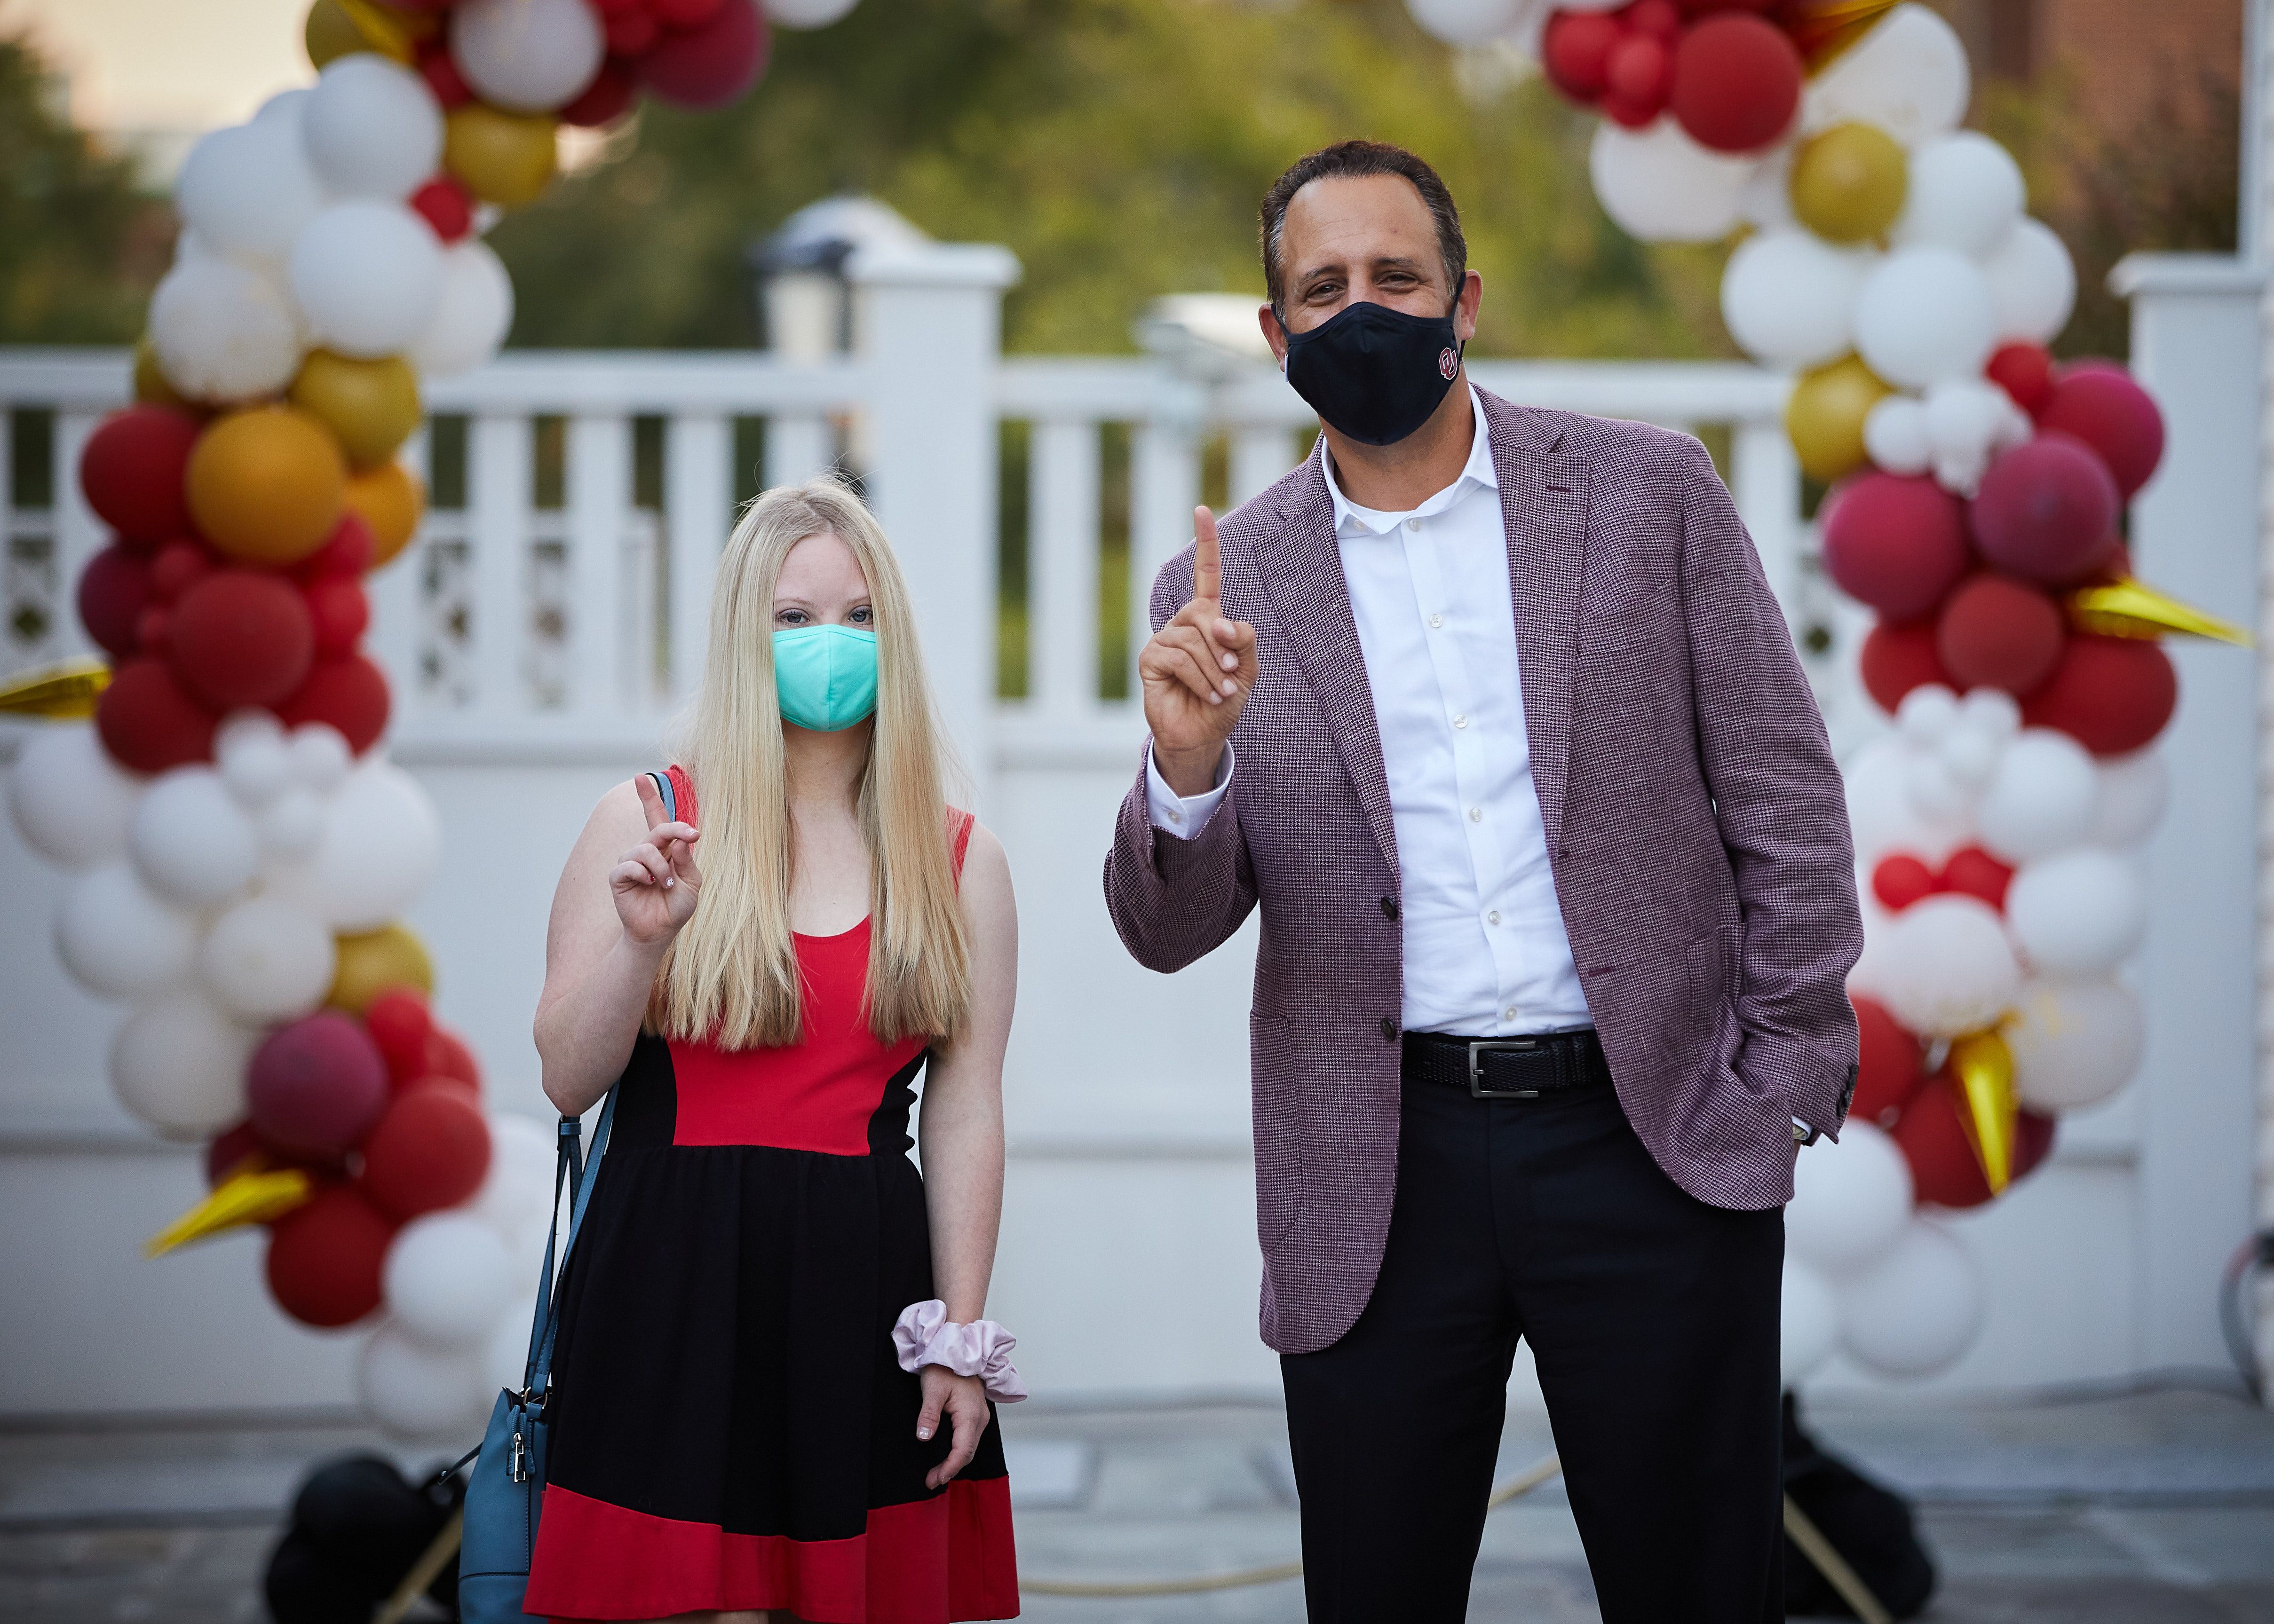 PLC Student Candace Moffitt posing outside with OU President Joseph Harroz wearing masks in response to the pandemic.